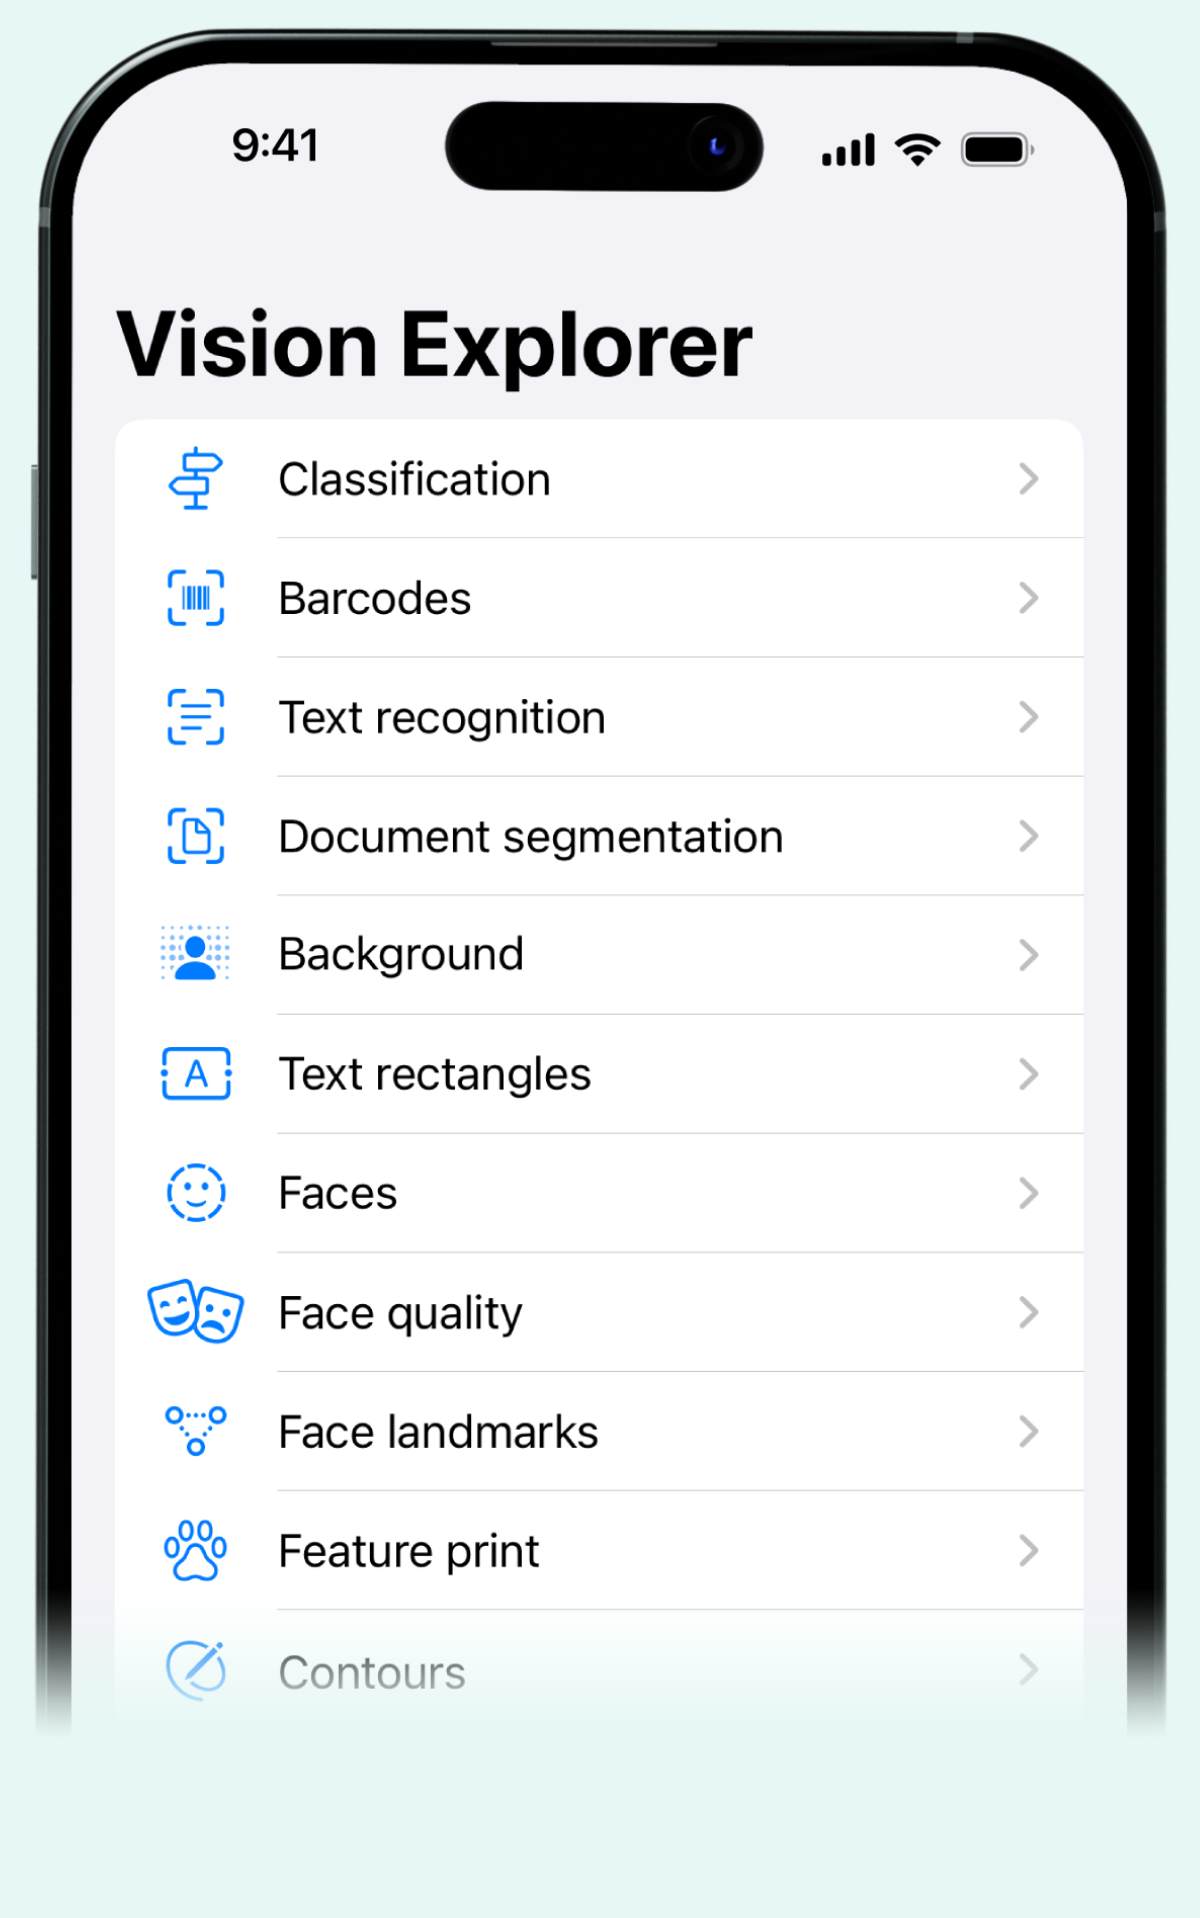 mobile app explore capabilities of the vision framework in Apple devices